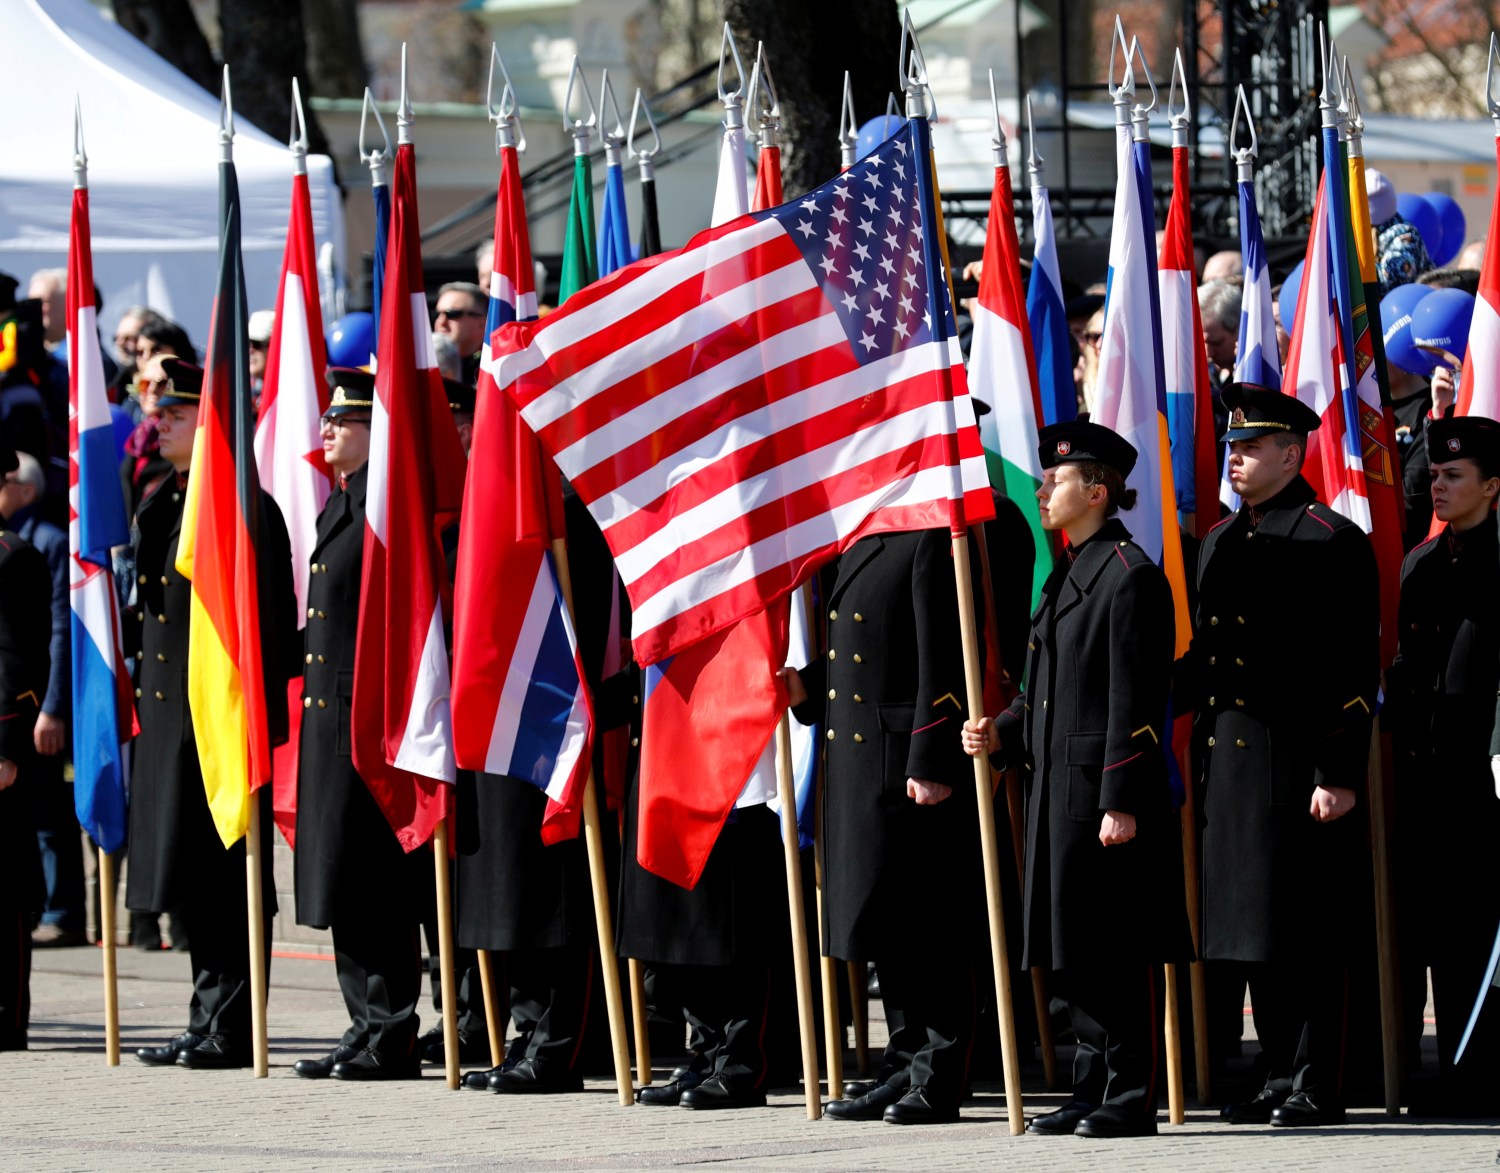 Lithuanian Military Academy students hold NATO membership states flags during the celebration of the the 15th anniversary of Lithuania's membership in NATO in Vilnius, Lithuania March 30, 2019. REUTERS/Ints Kalnins - RC1B87408B50